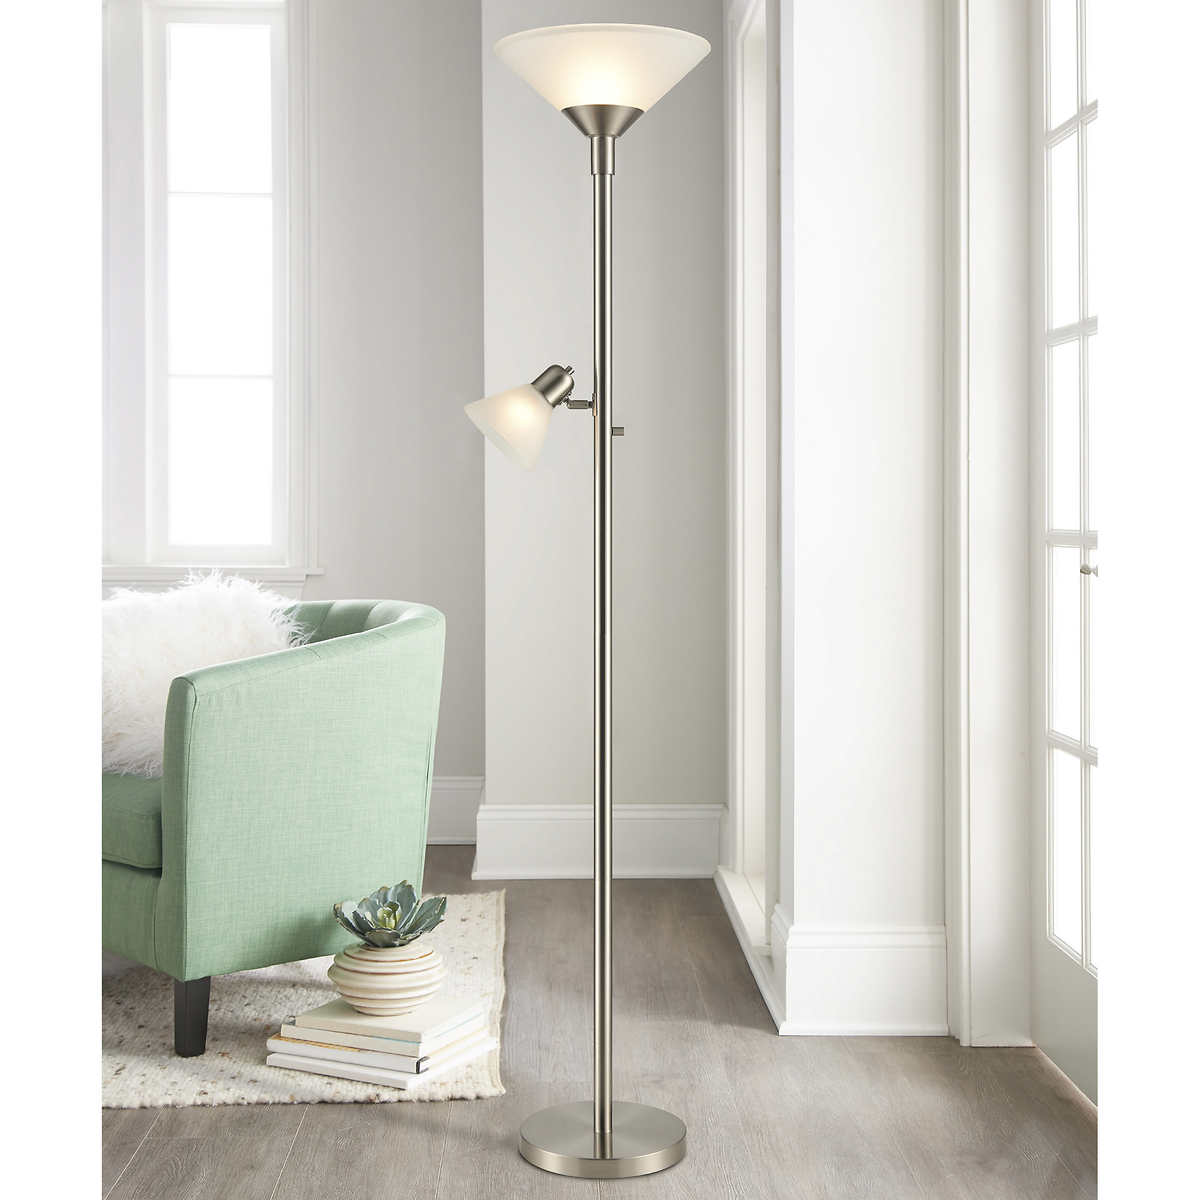 Torchiere Floor Lamp With Reading Light, Torchiere Floor Lamp With Reading Light Silver